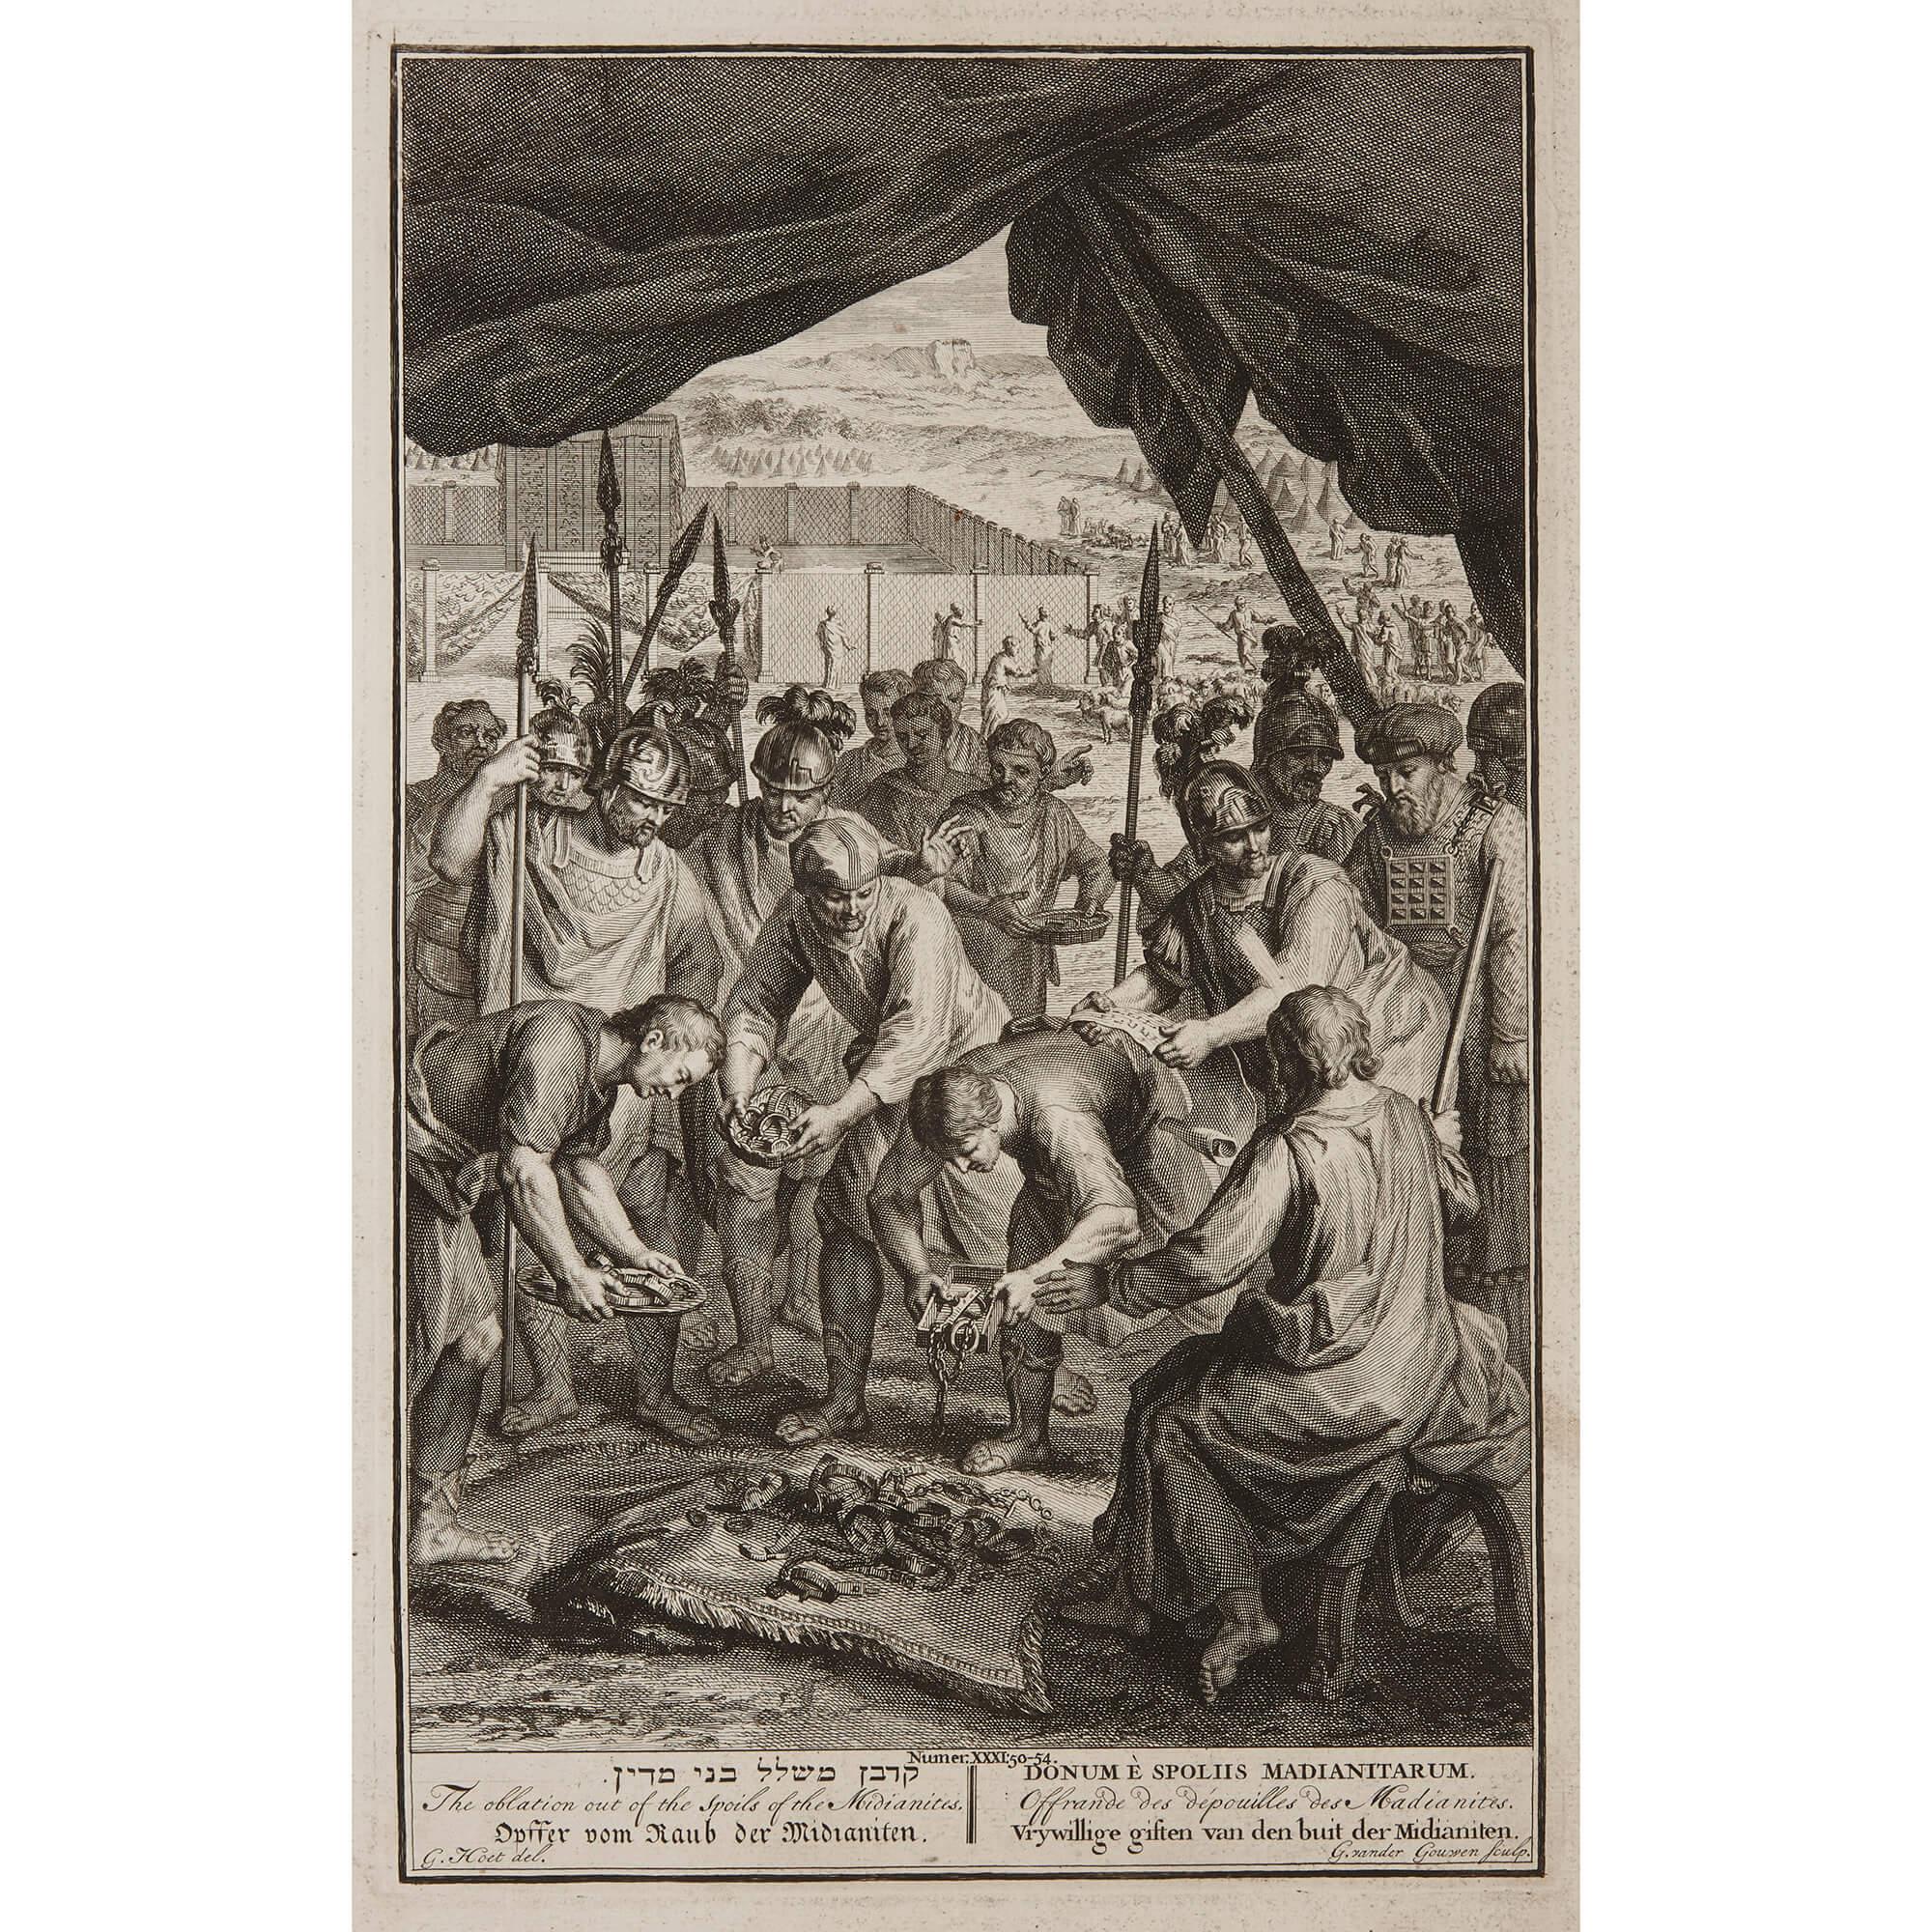 The present collection is a set of 131 prints after Gerard Hoet, the Dutch golden age painter and engraver, depicting various biblical scenes. Hoet was a leading artist in the Classicizing Dutch Academic style, and his work is defined by history